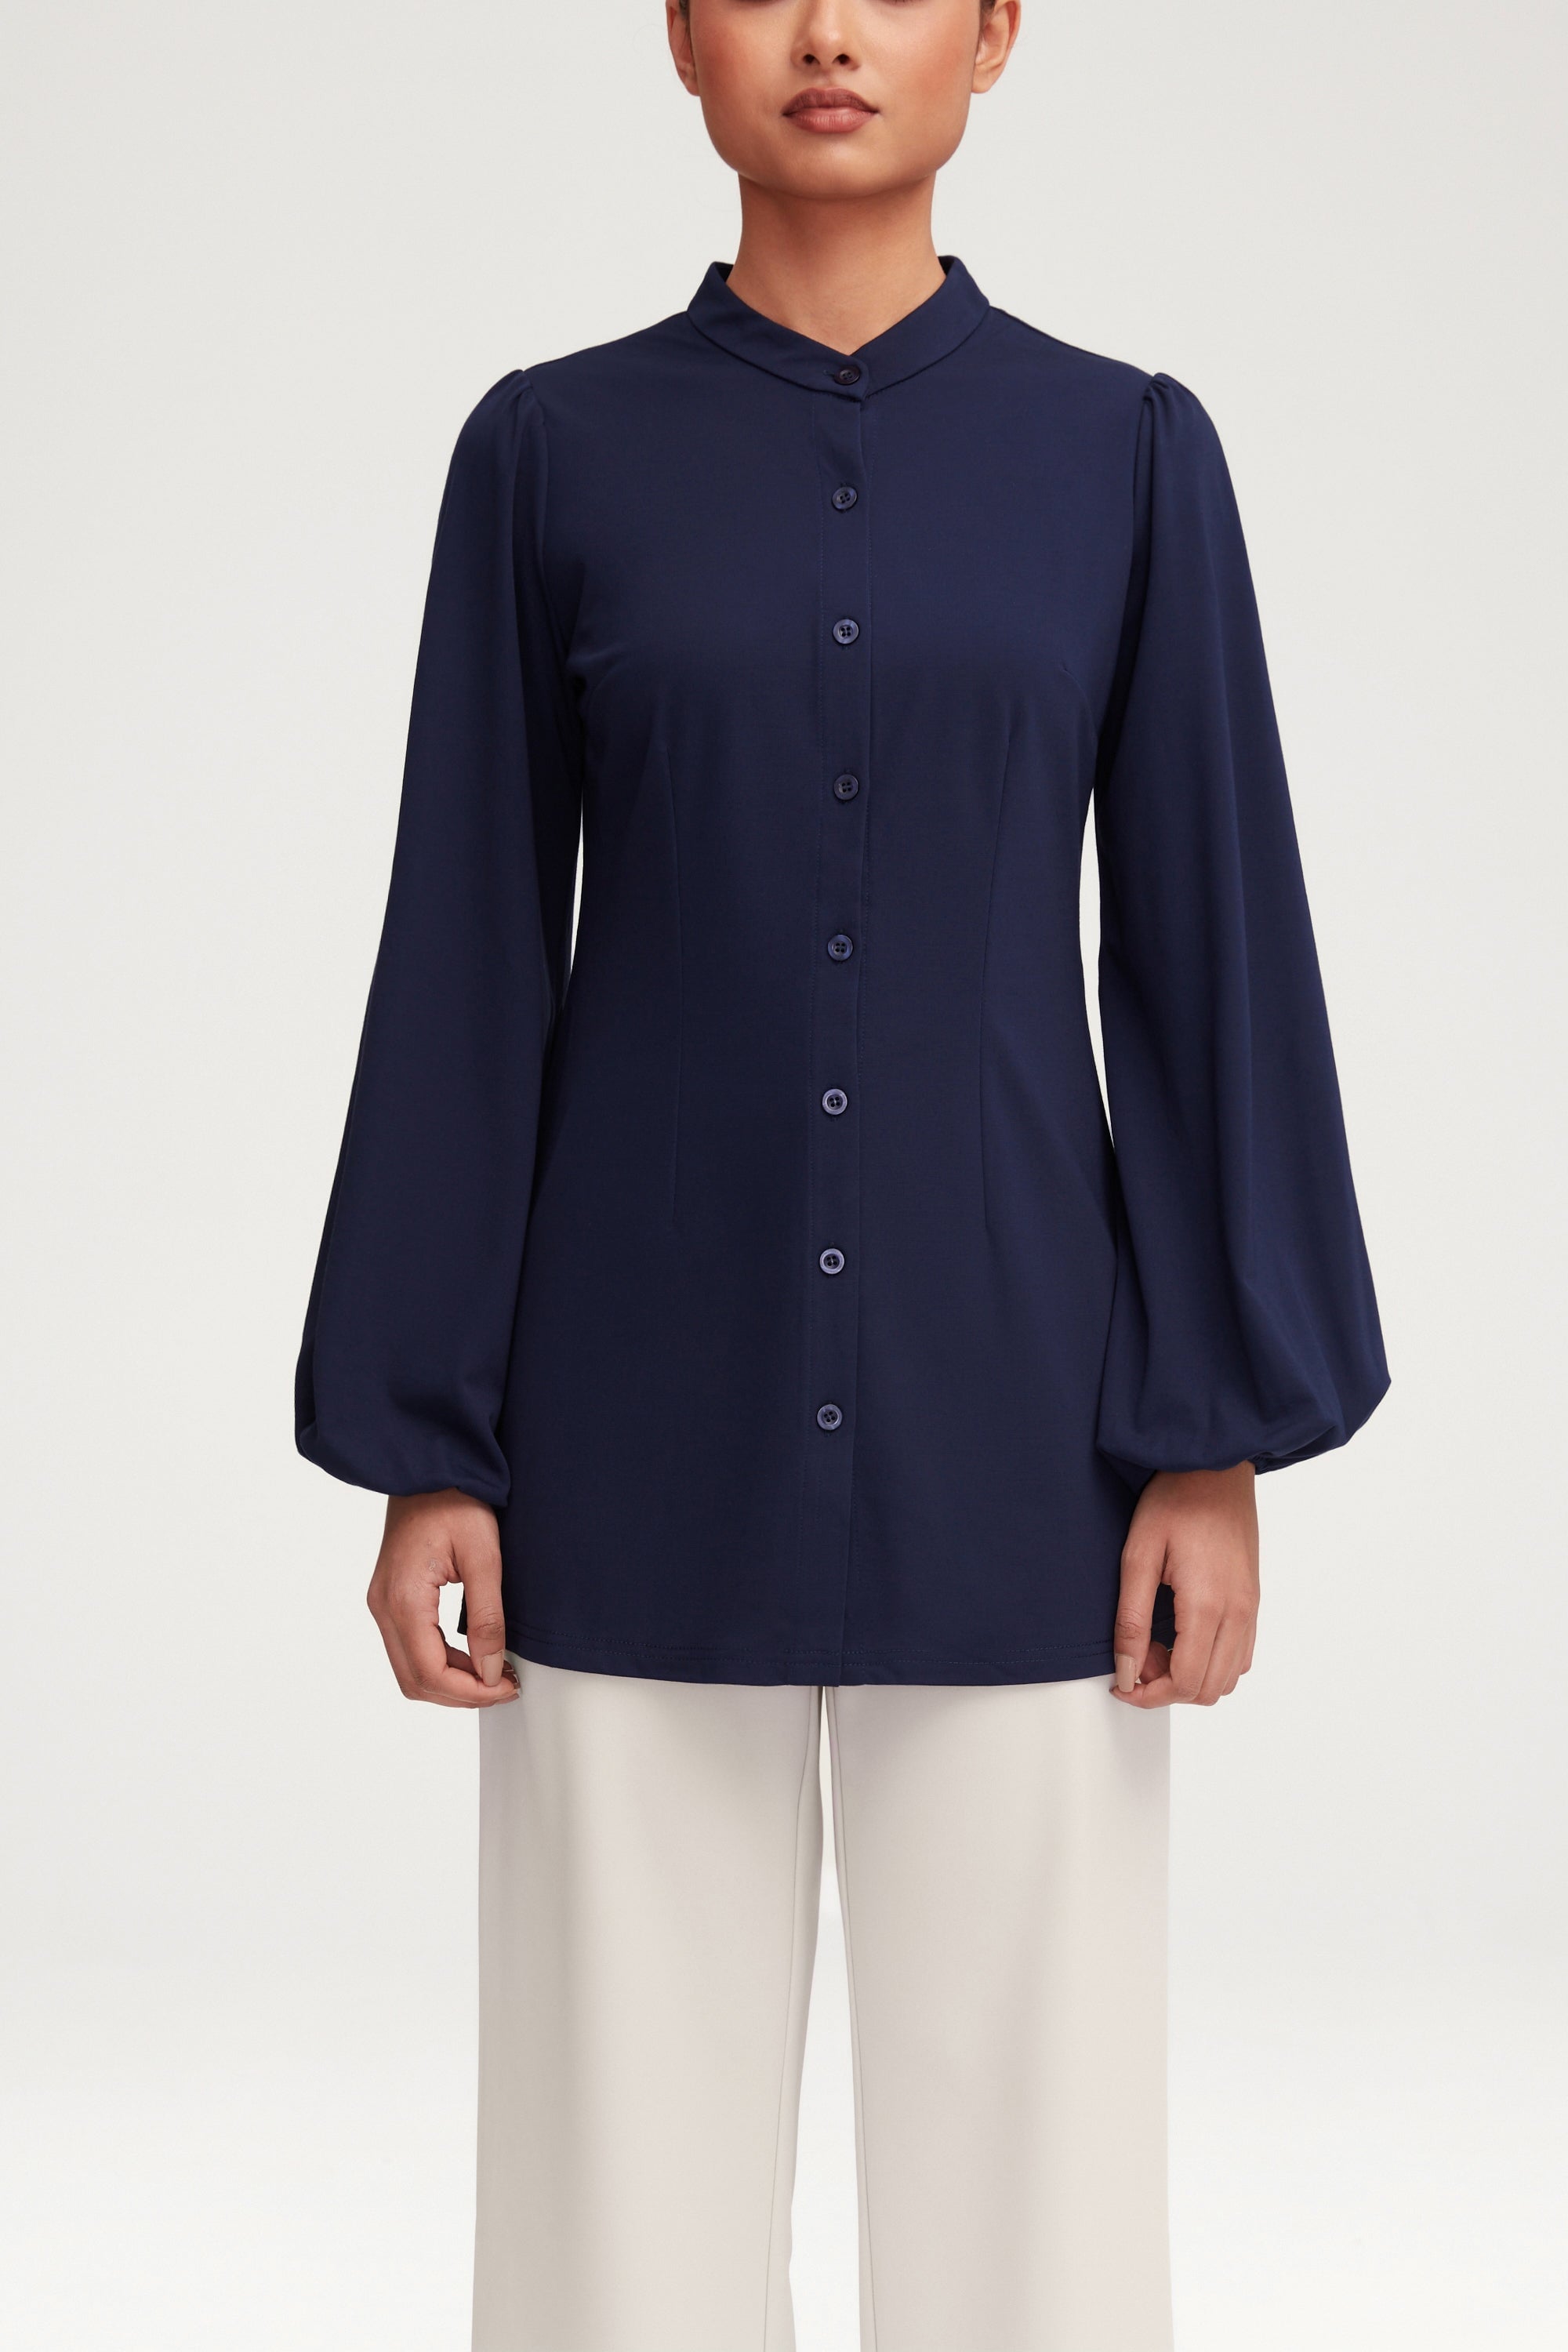 Rayana Jersey Button Down Top - Navy Blue Clothing Veiled 